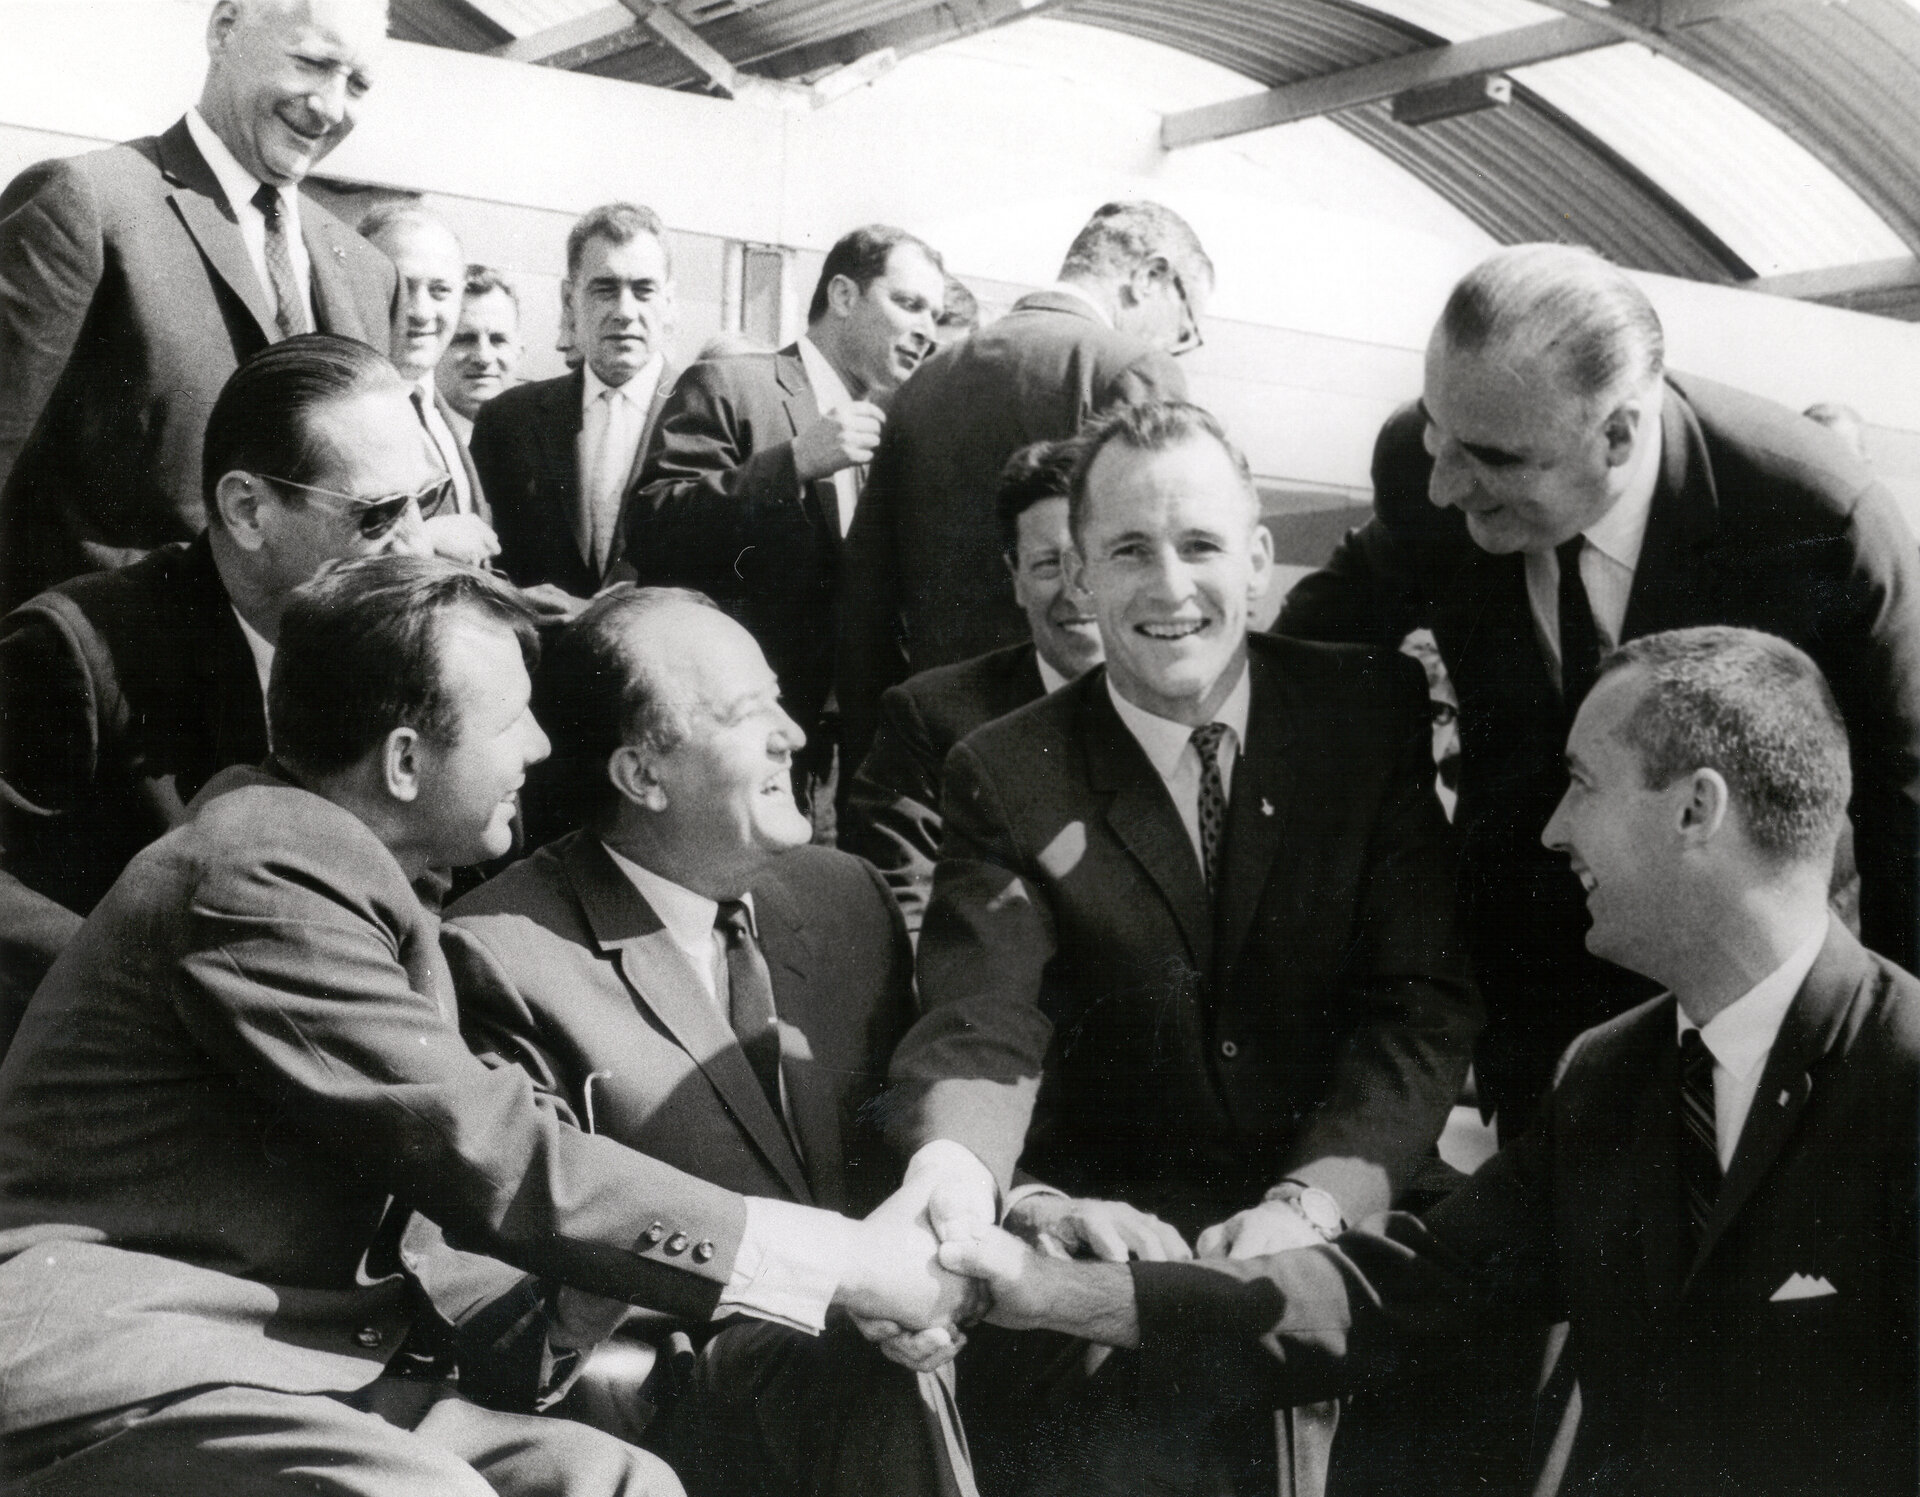 Gagarin met with astronauts Ed White and James McDivitt at the Paris Air Show in 1965.